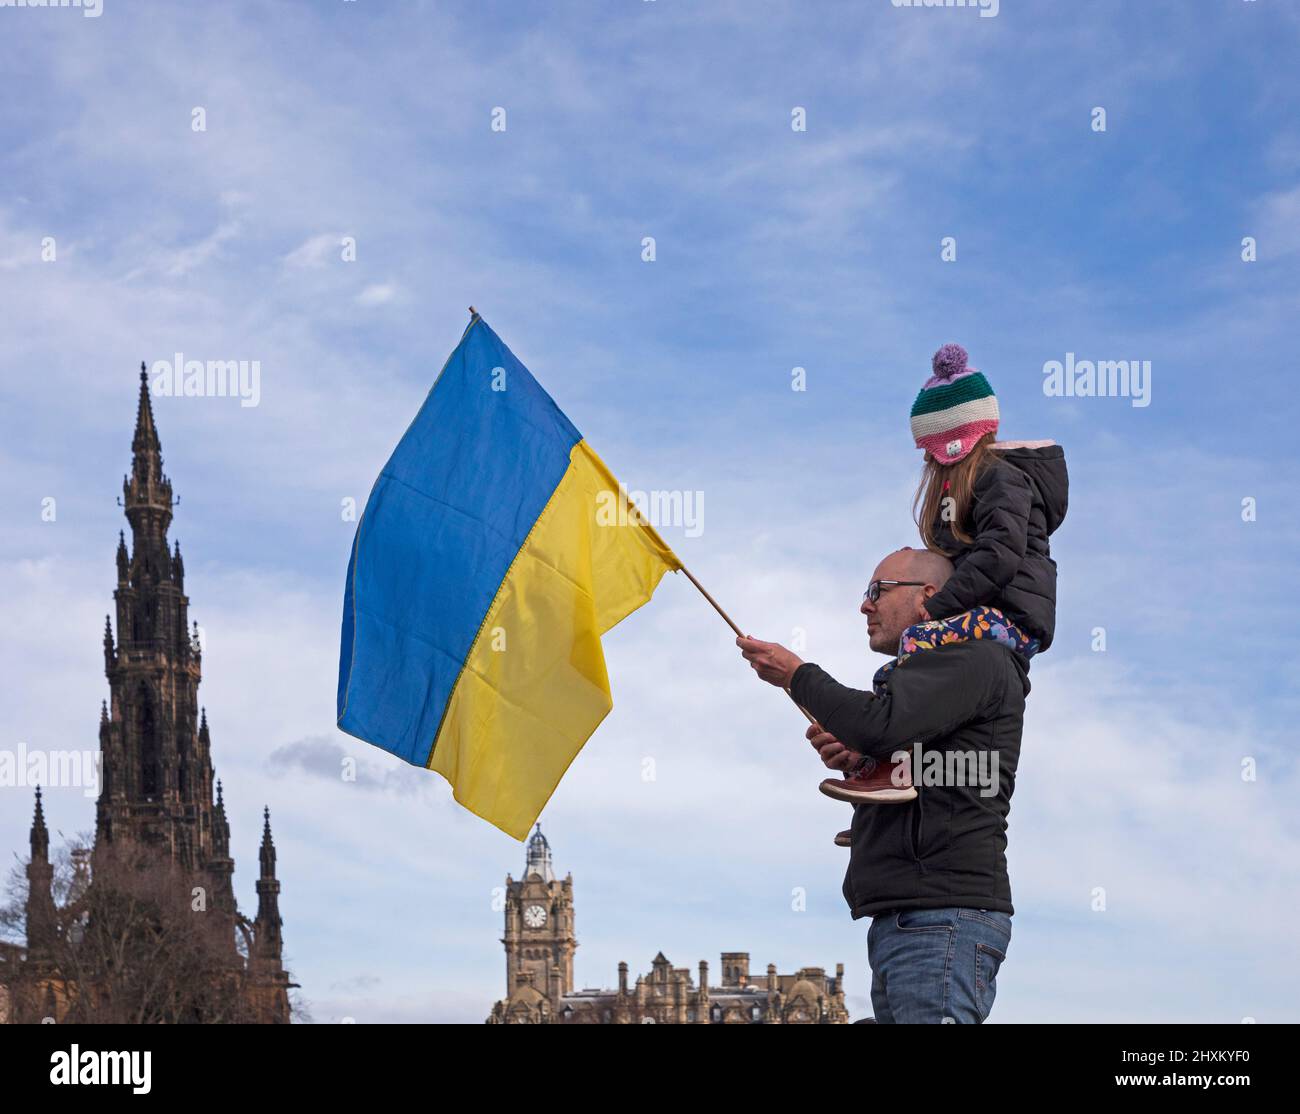 Edinburgh city centre, Scotland, UK. 13th March 2022. Poignant image of Solidarity for Ukraine, Edinburgh, Scotland, UK. Pictured: Erica on the sholders of her father flying the Ukrainian flag in support against the Russian invasion. Credit: Arch White/alamy live news. Stock Photo